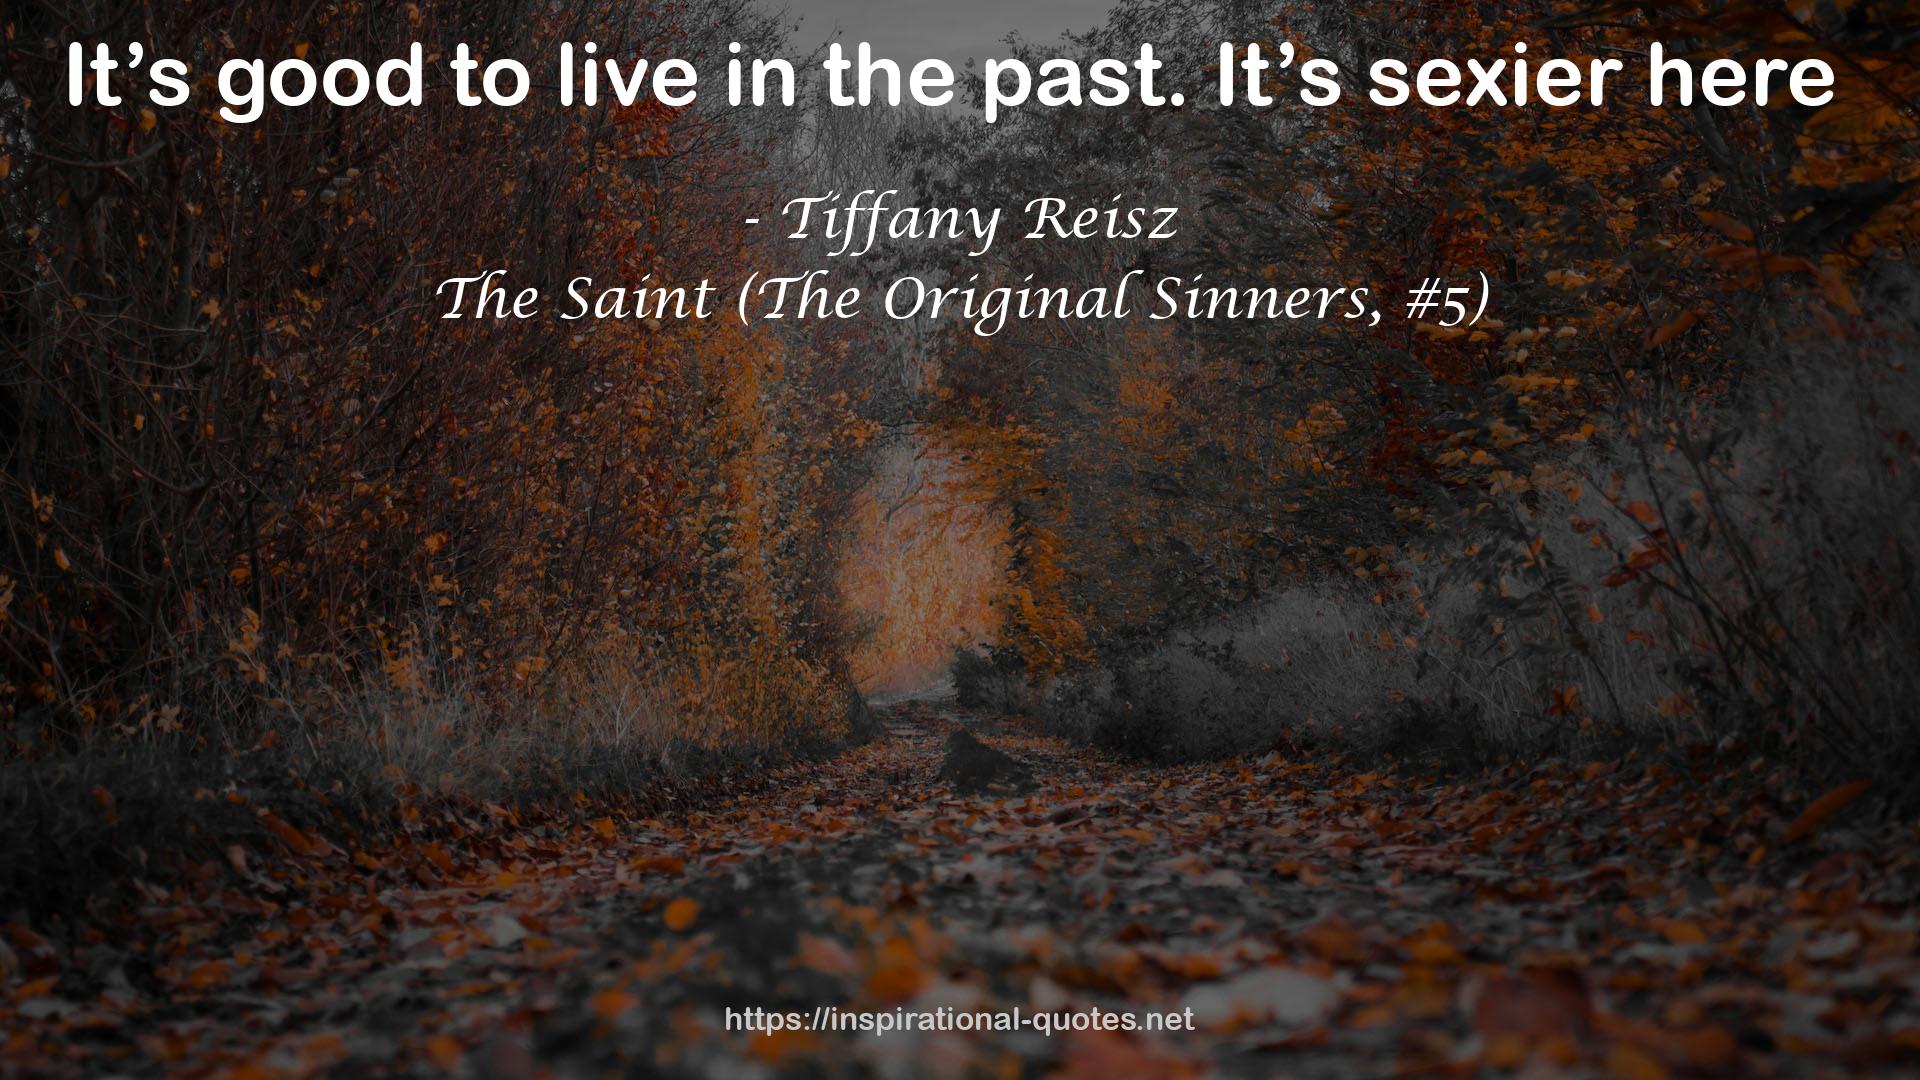 The Saint (The Original Sinners, #5) QUOTES